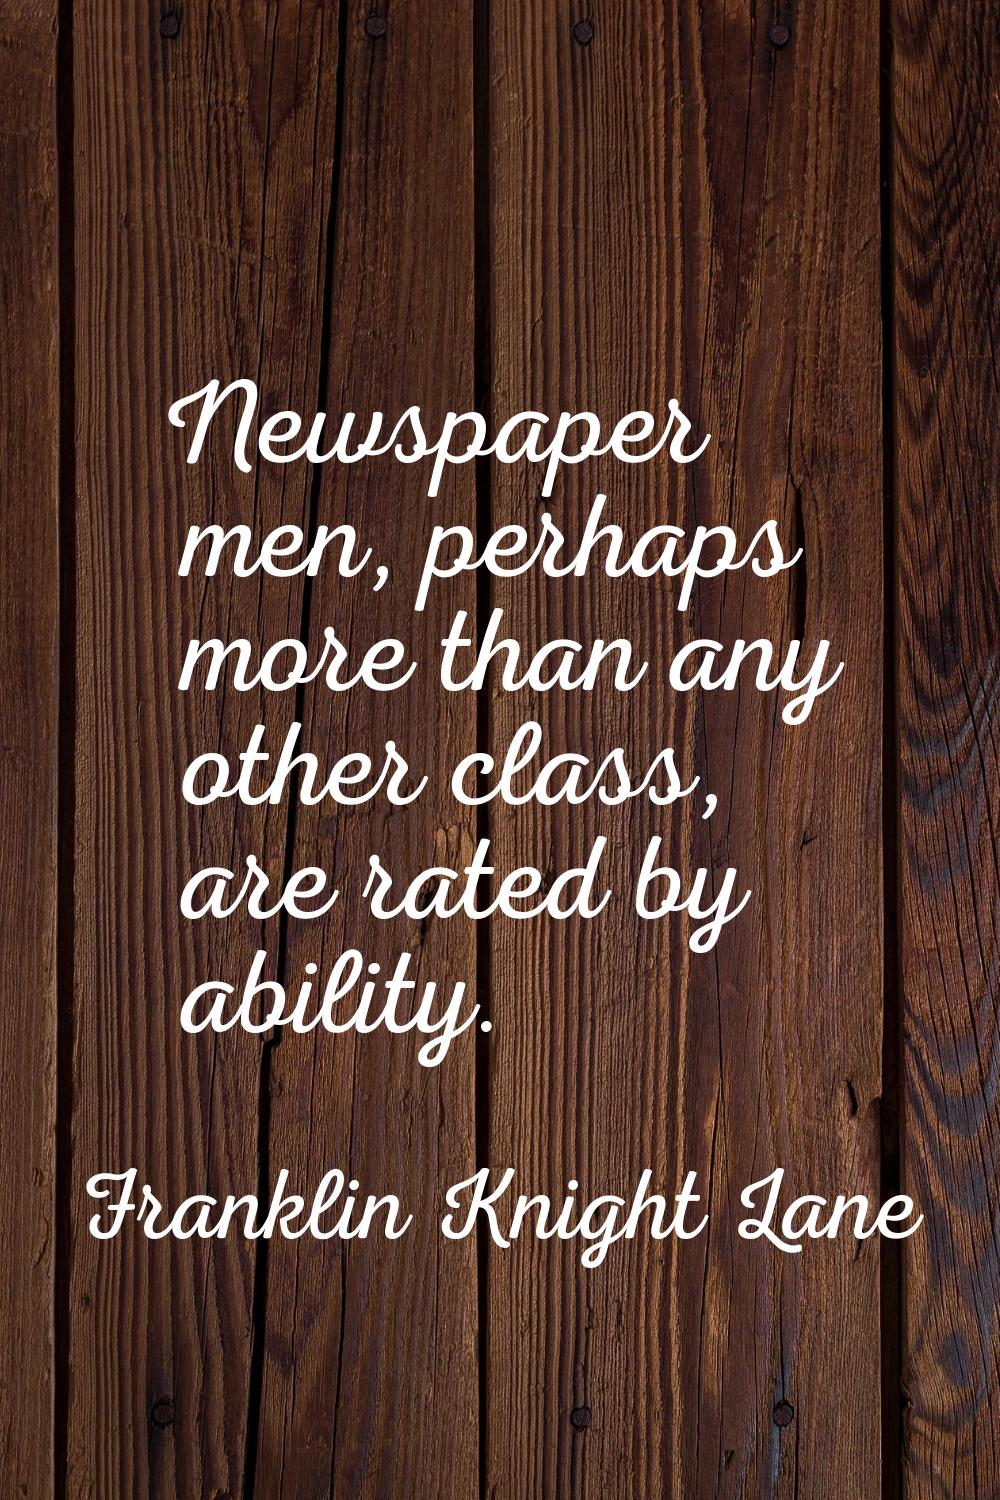 Newspaper men, perhaps more than any other class, are rated by ability.